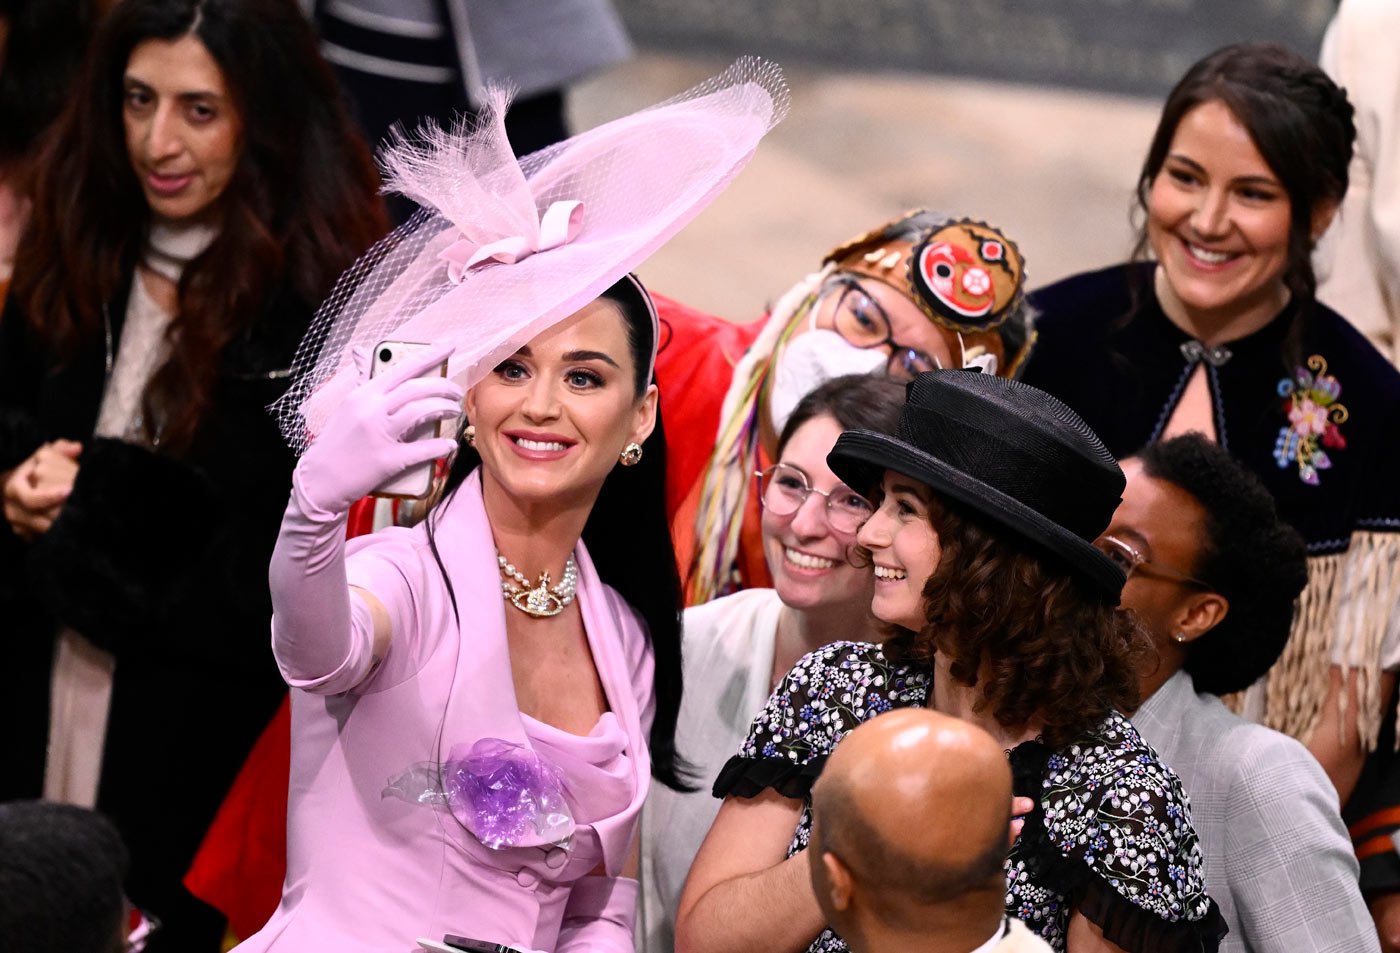 Katy Perry takes selfies with guests before the coronation ceremony